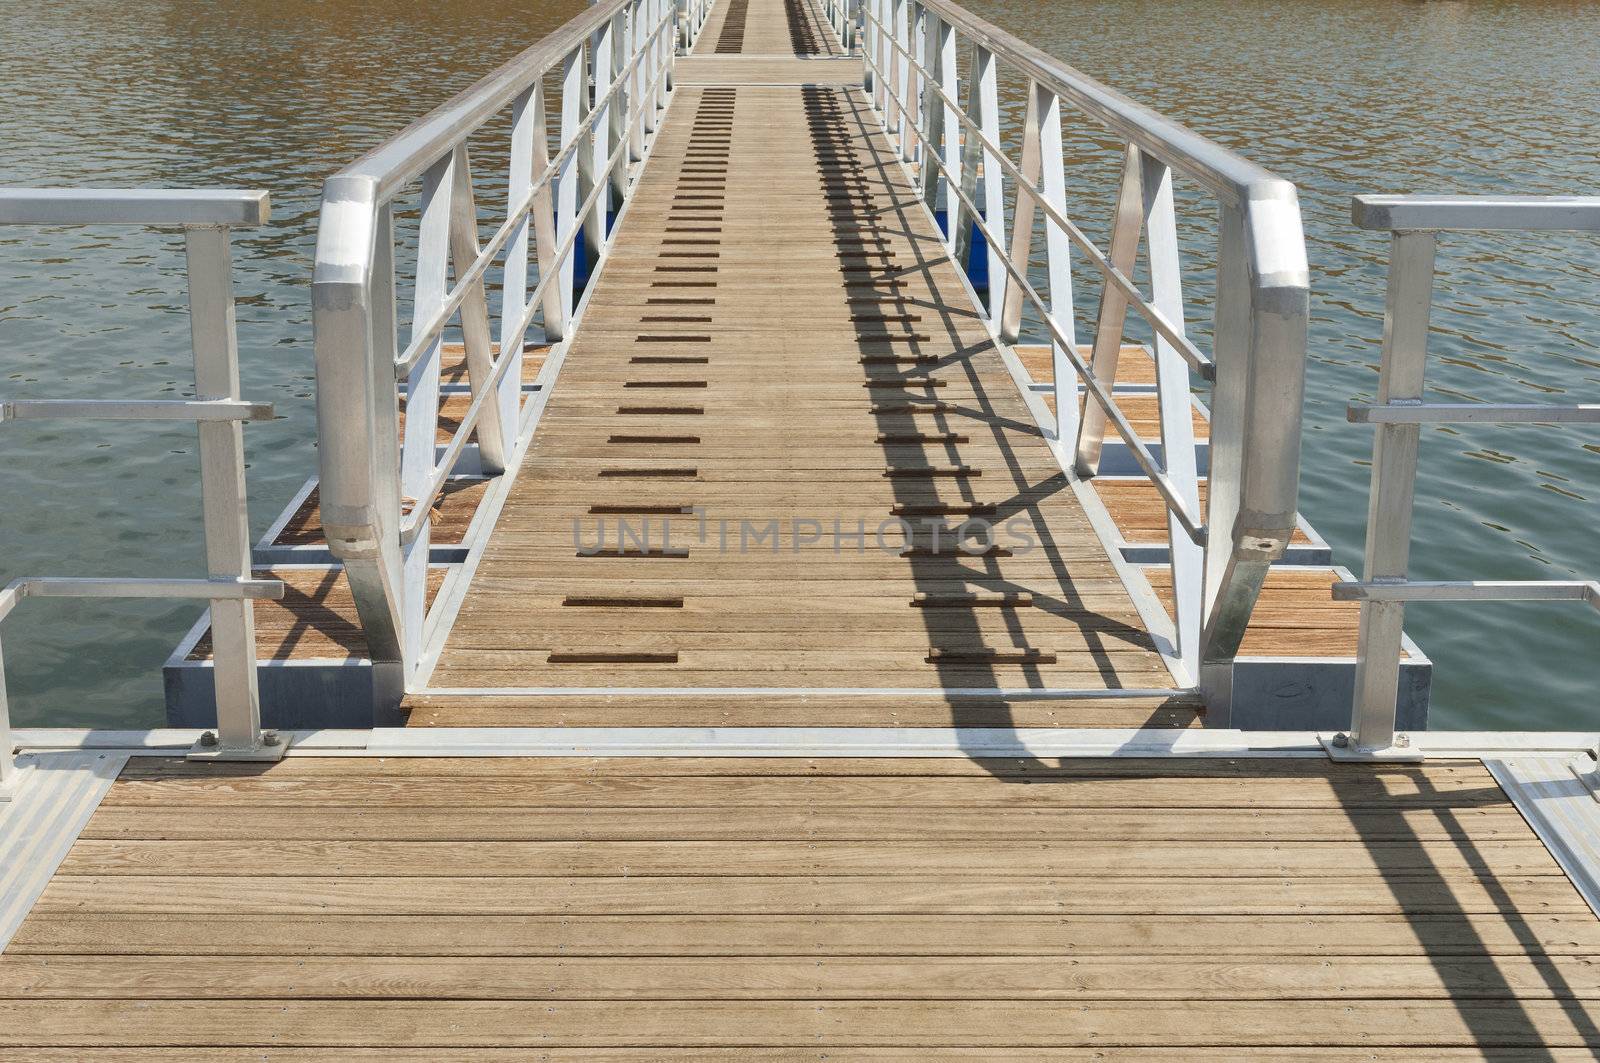 Wooden walkway serving Amieira pier on the banks of the reservoir of Alqueva, Alentejo, Portugal